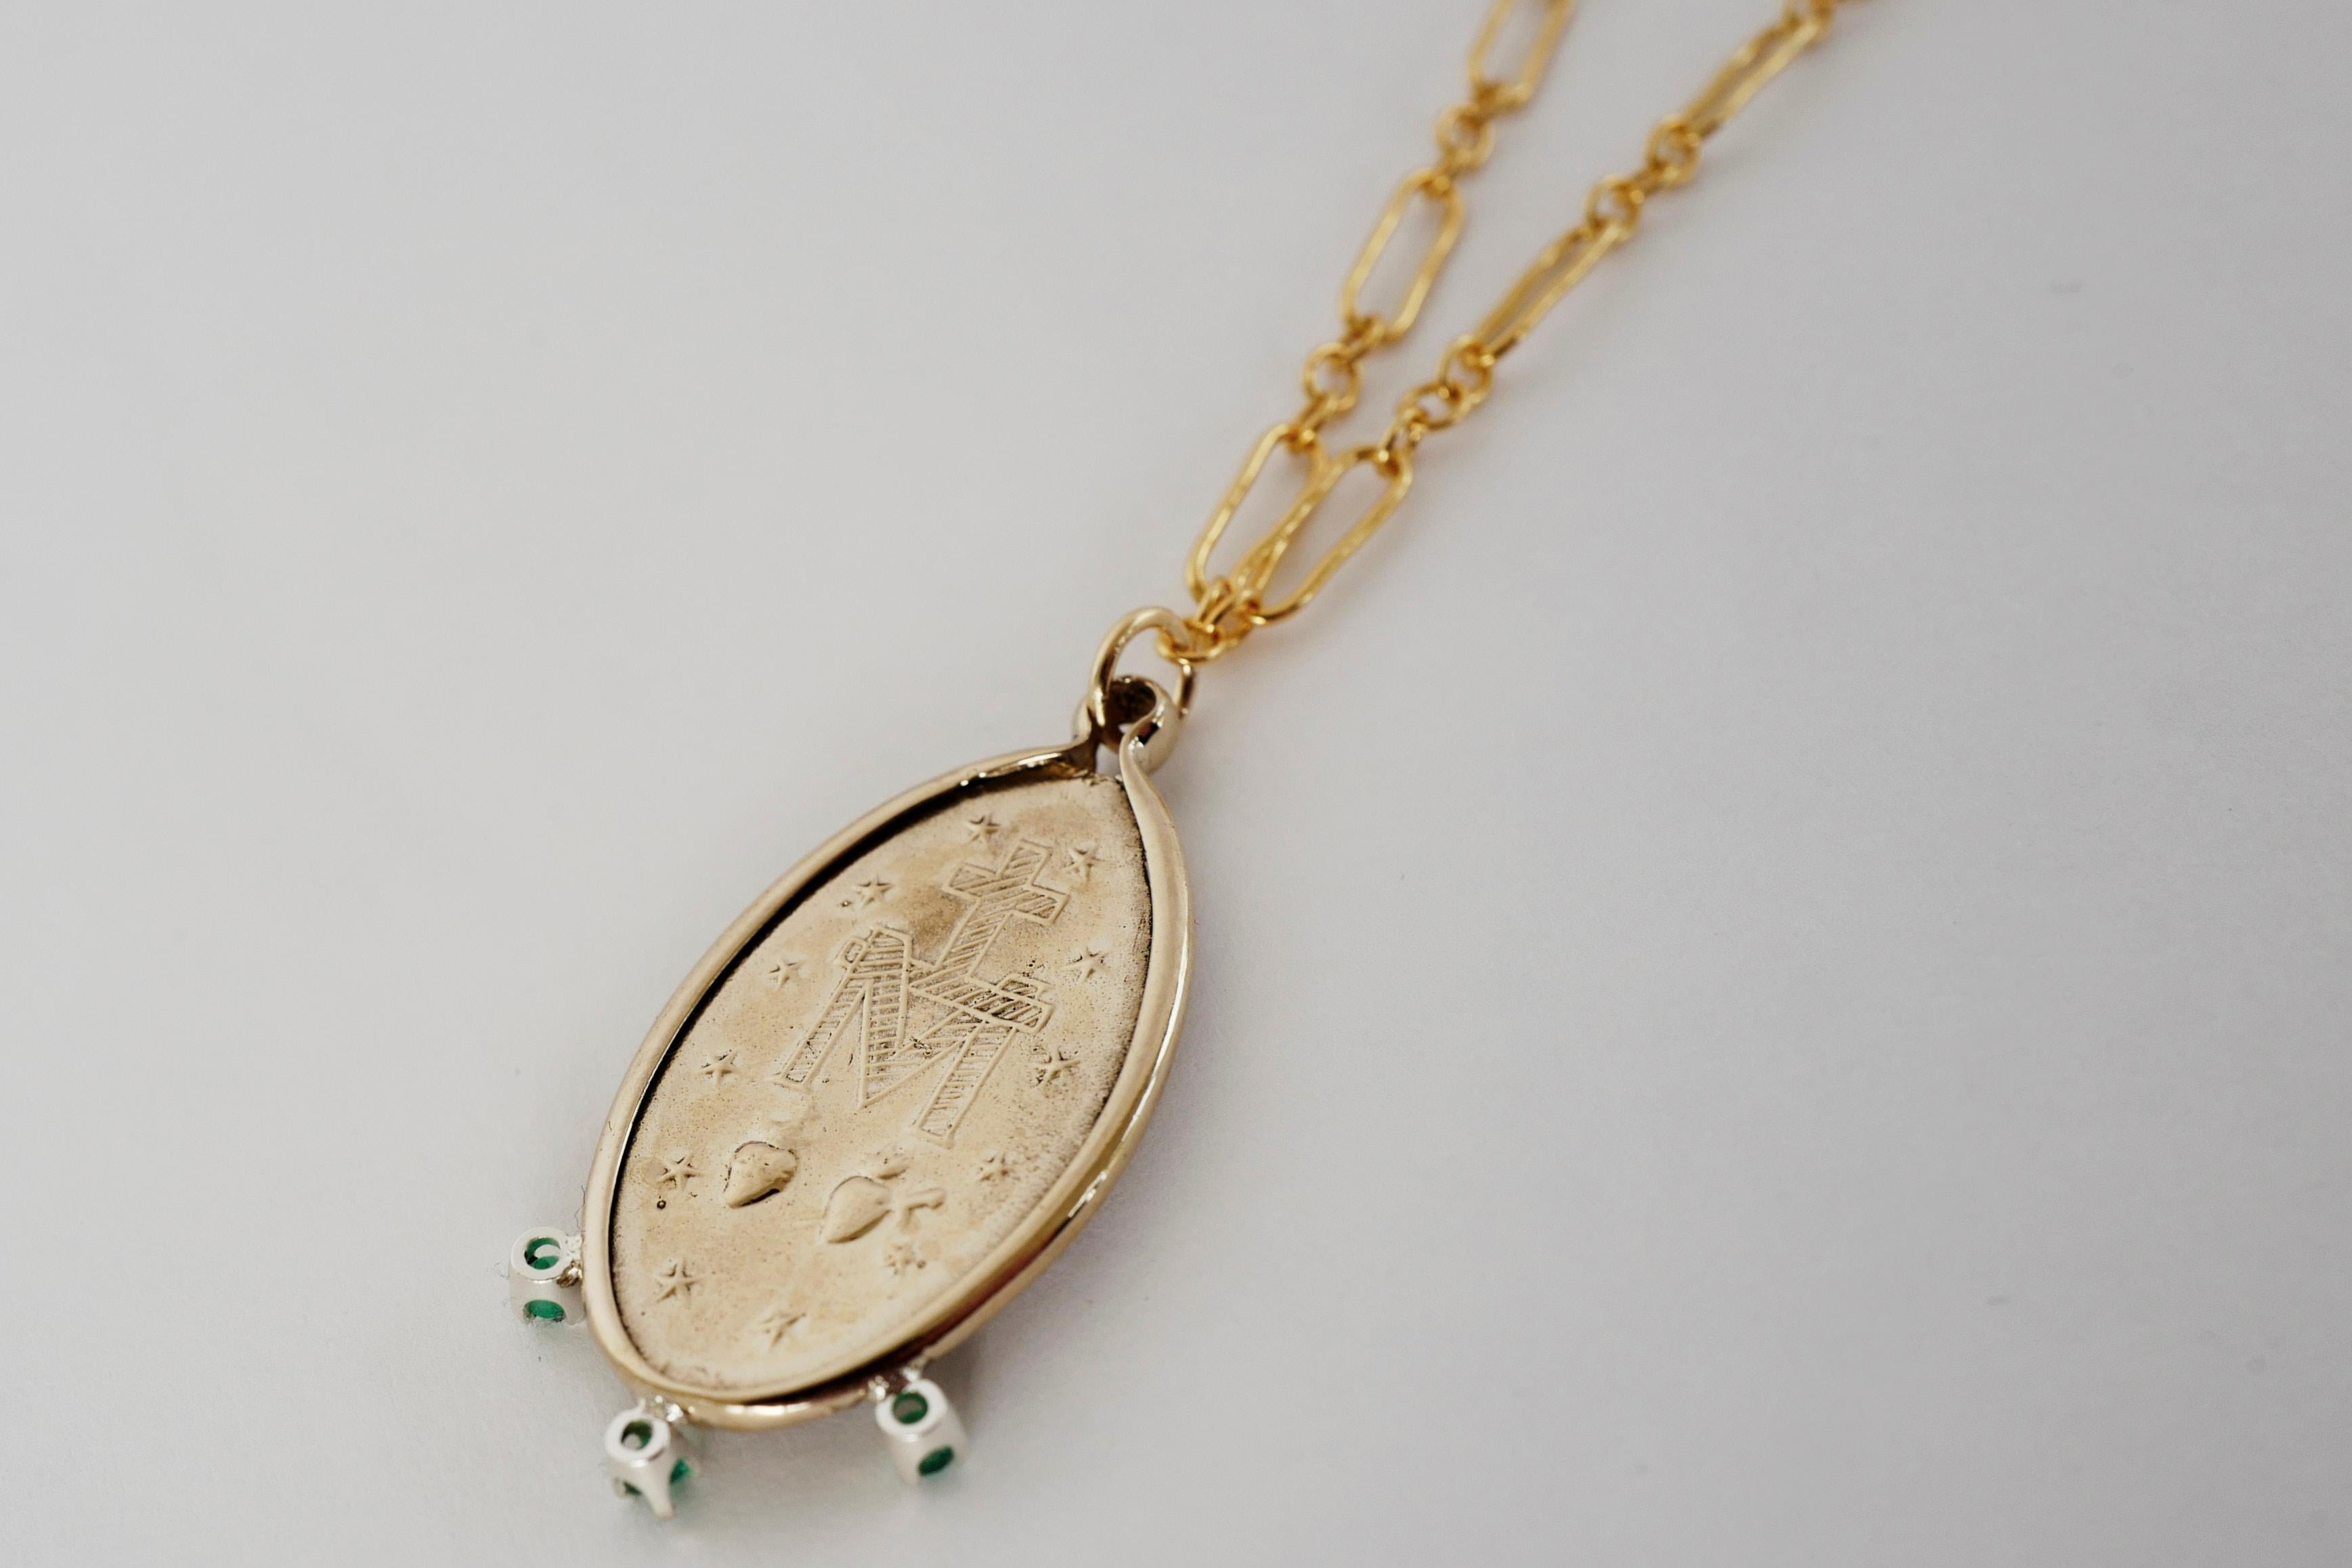 Women's Emerald Virgin Mary Oval Medal Chain Necklace Gold Filled Chain J Dauphin For Sale